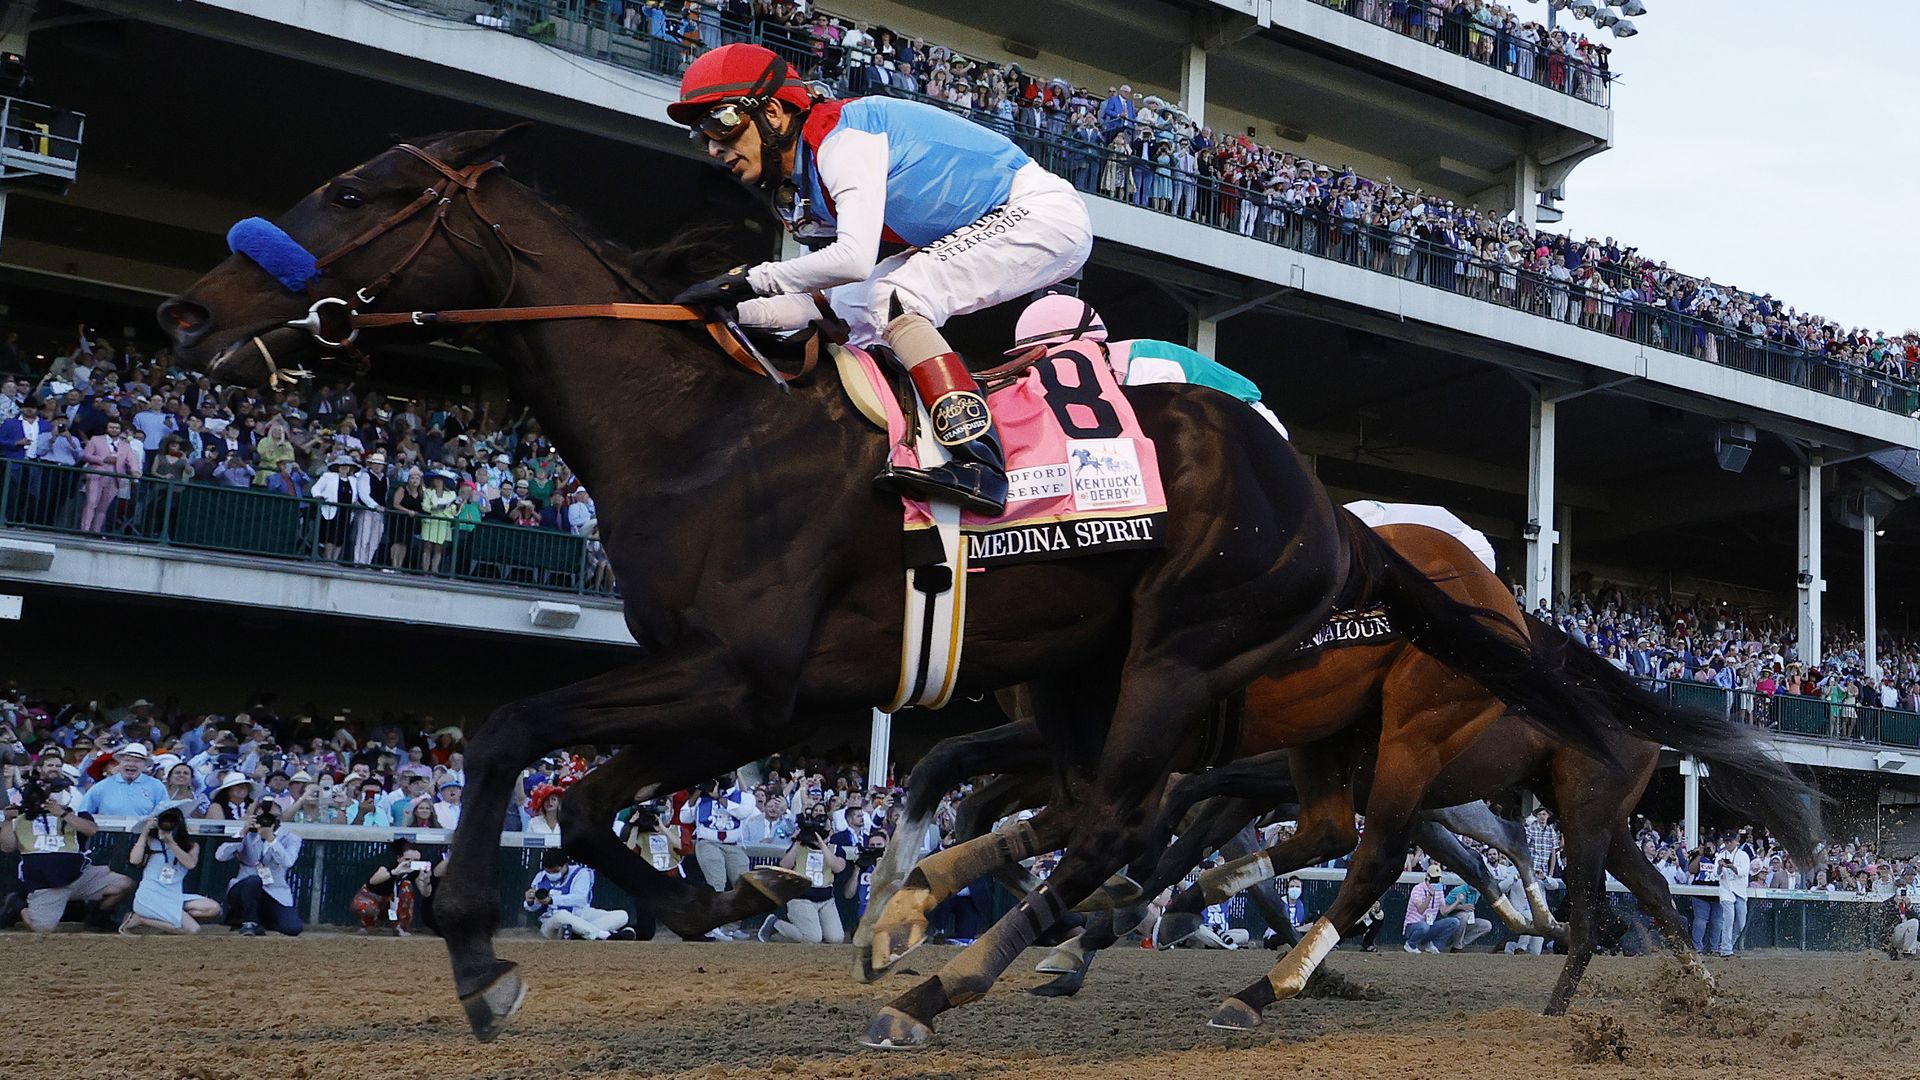 Picture of horse Medina Spirit competing in the Kentucky Derby